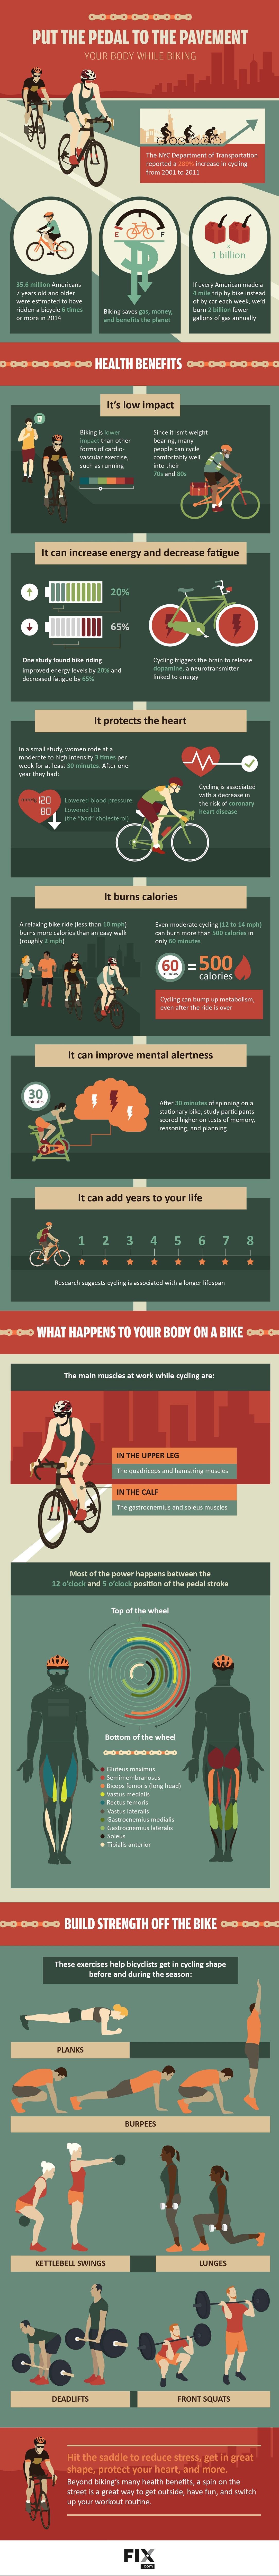 health benefits of Cycling 4